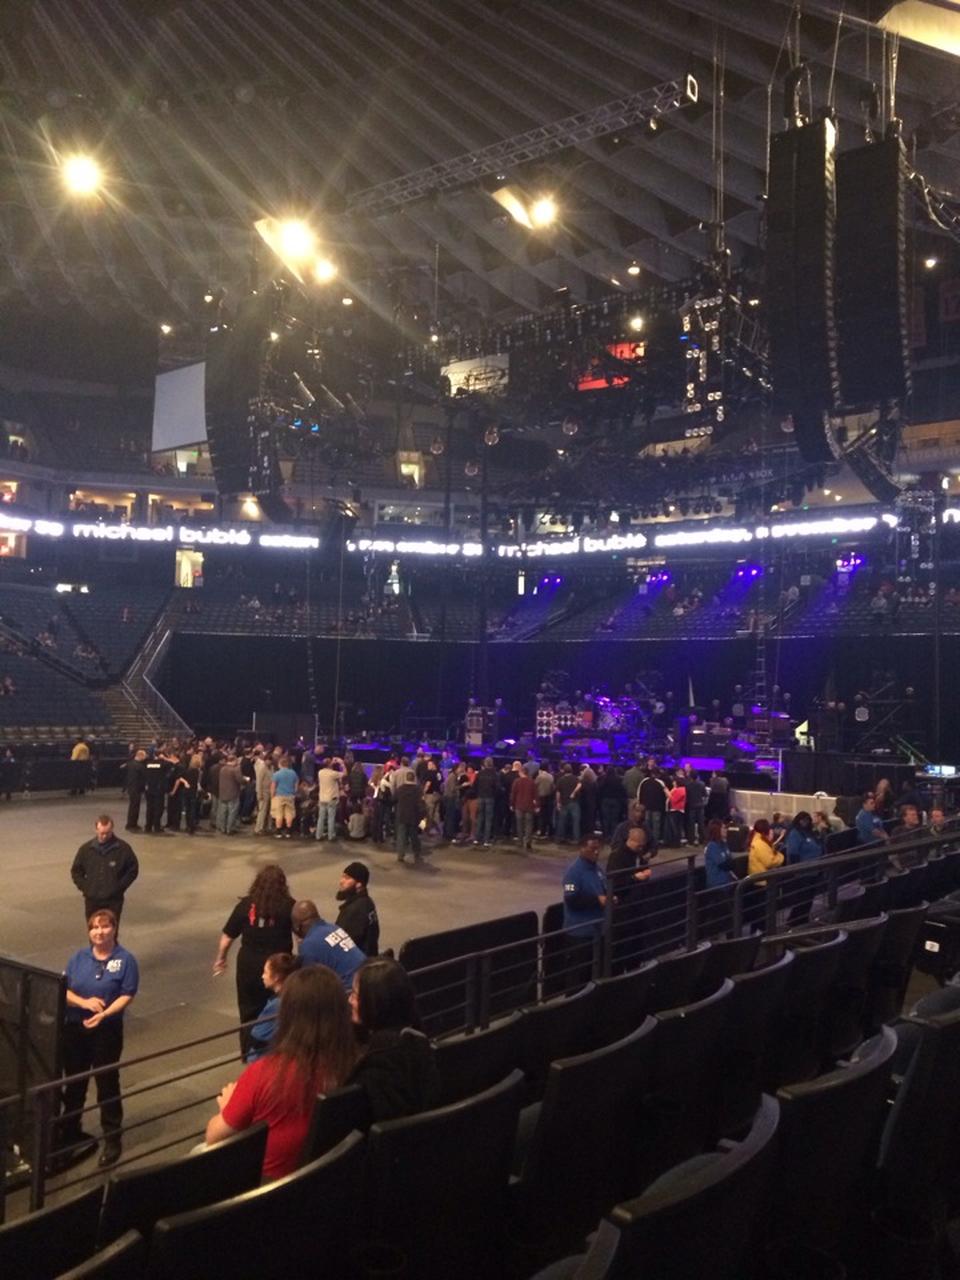 Oracle Arena Section 101 Concert Seating - RateYourSeats.com